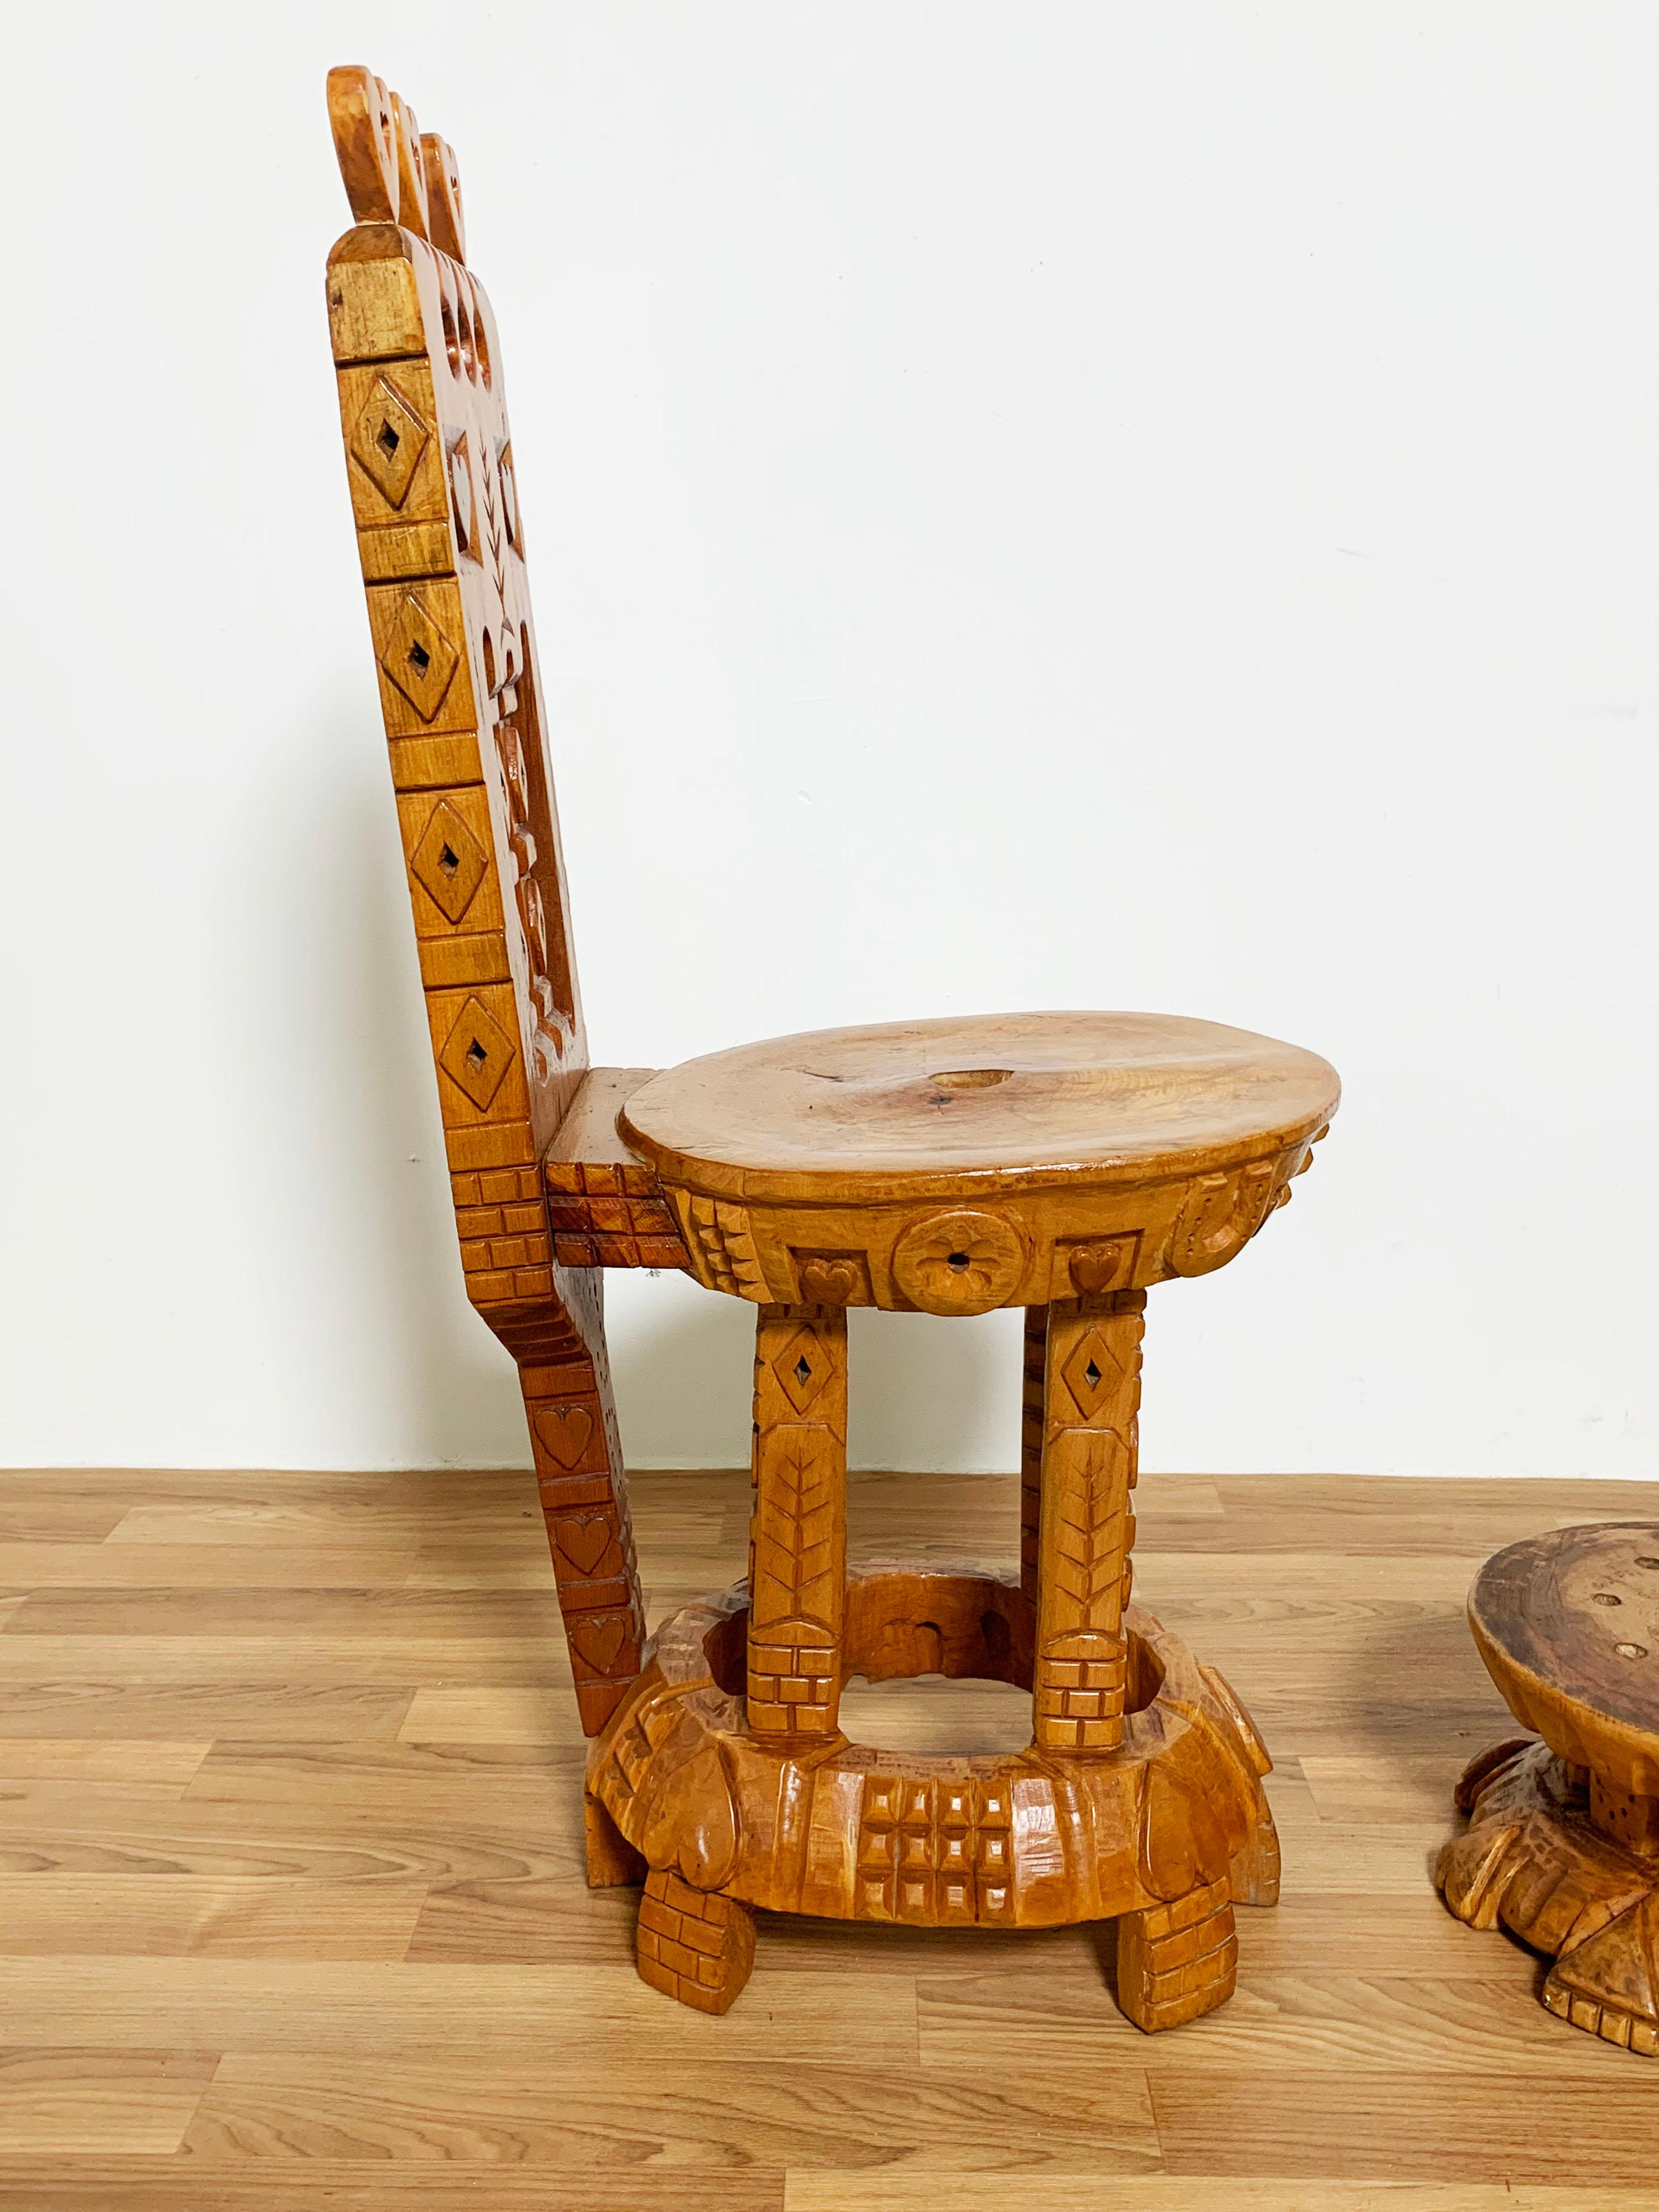 American Hand Carved Folk Art Chairs by Joseph Deveau, Circa 1950s For Sale